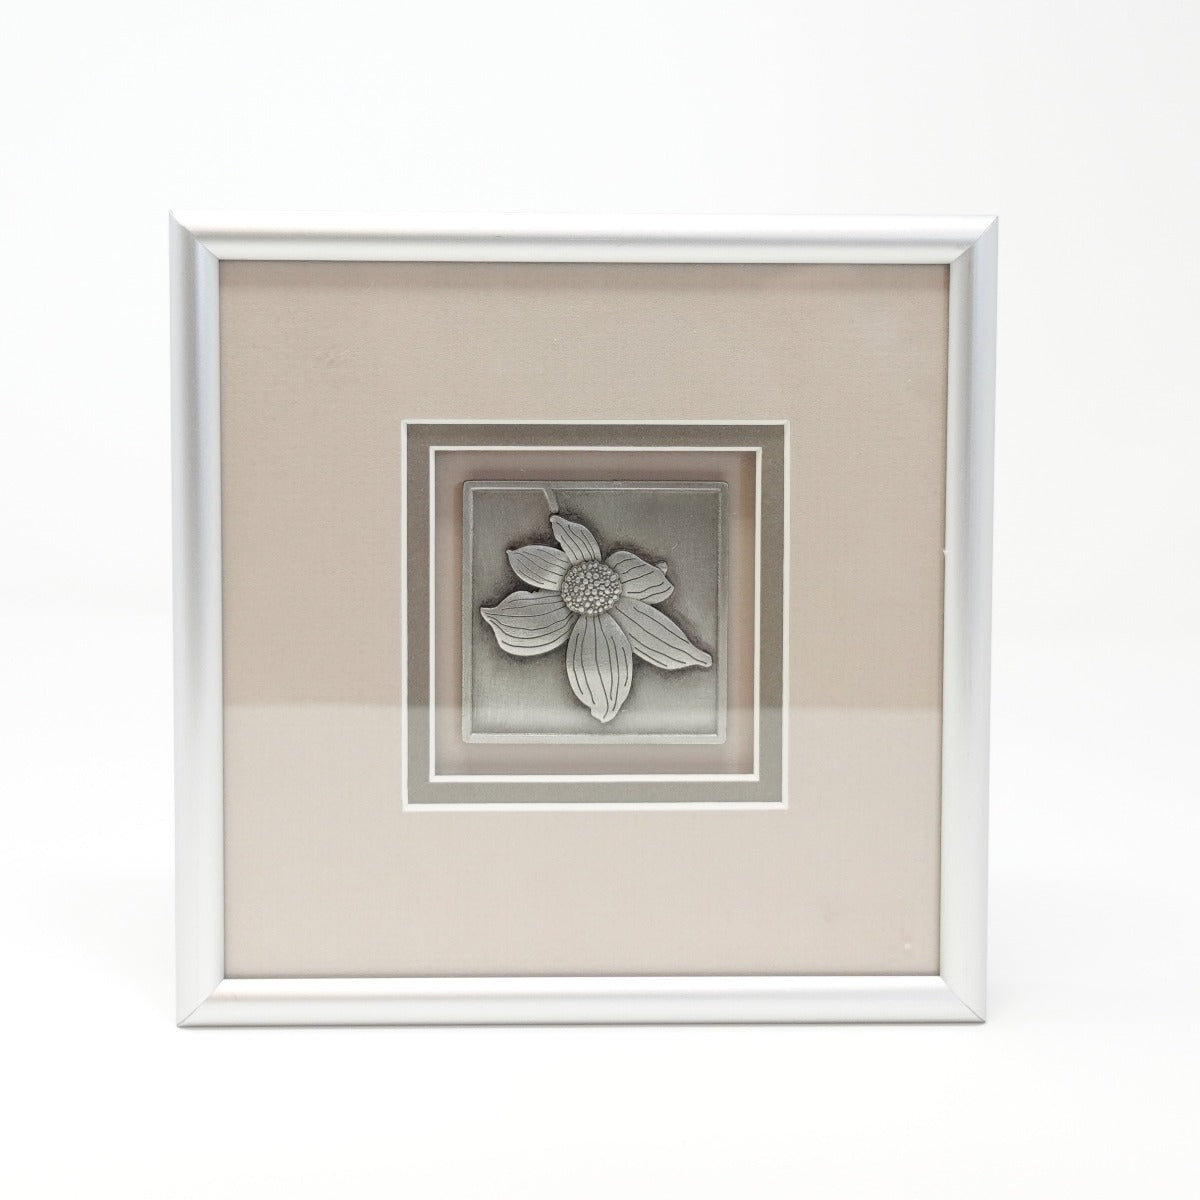 Sculptures in Pewter - pewter picture & frame - dogwood flower